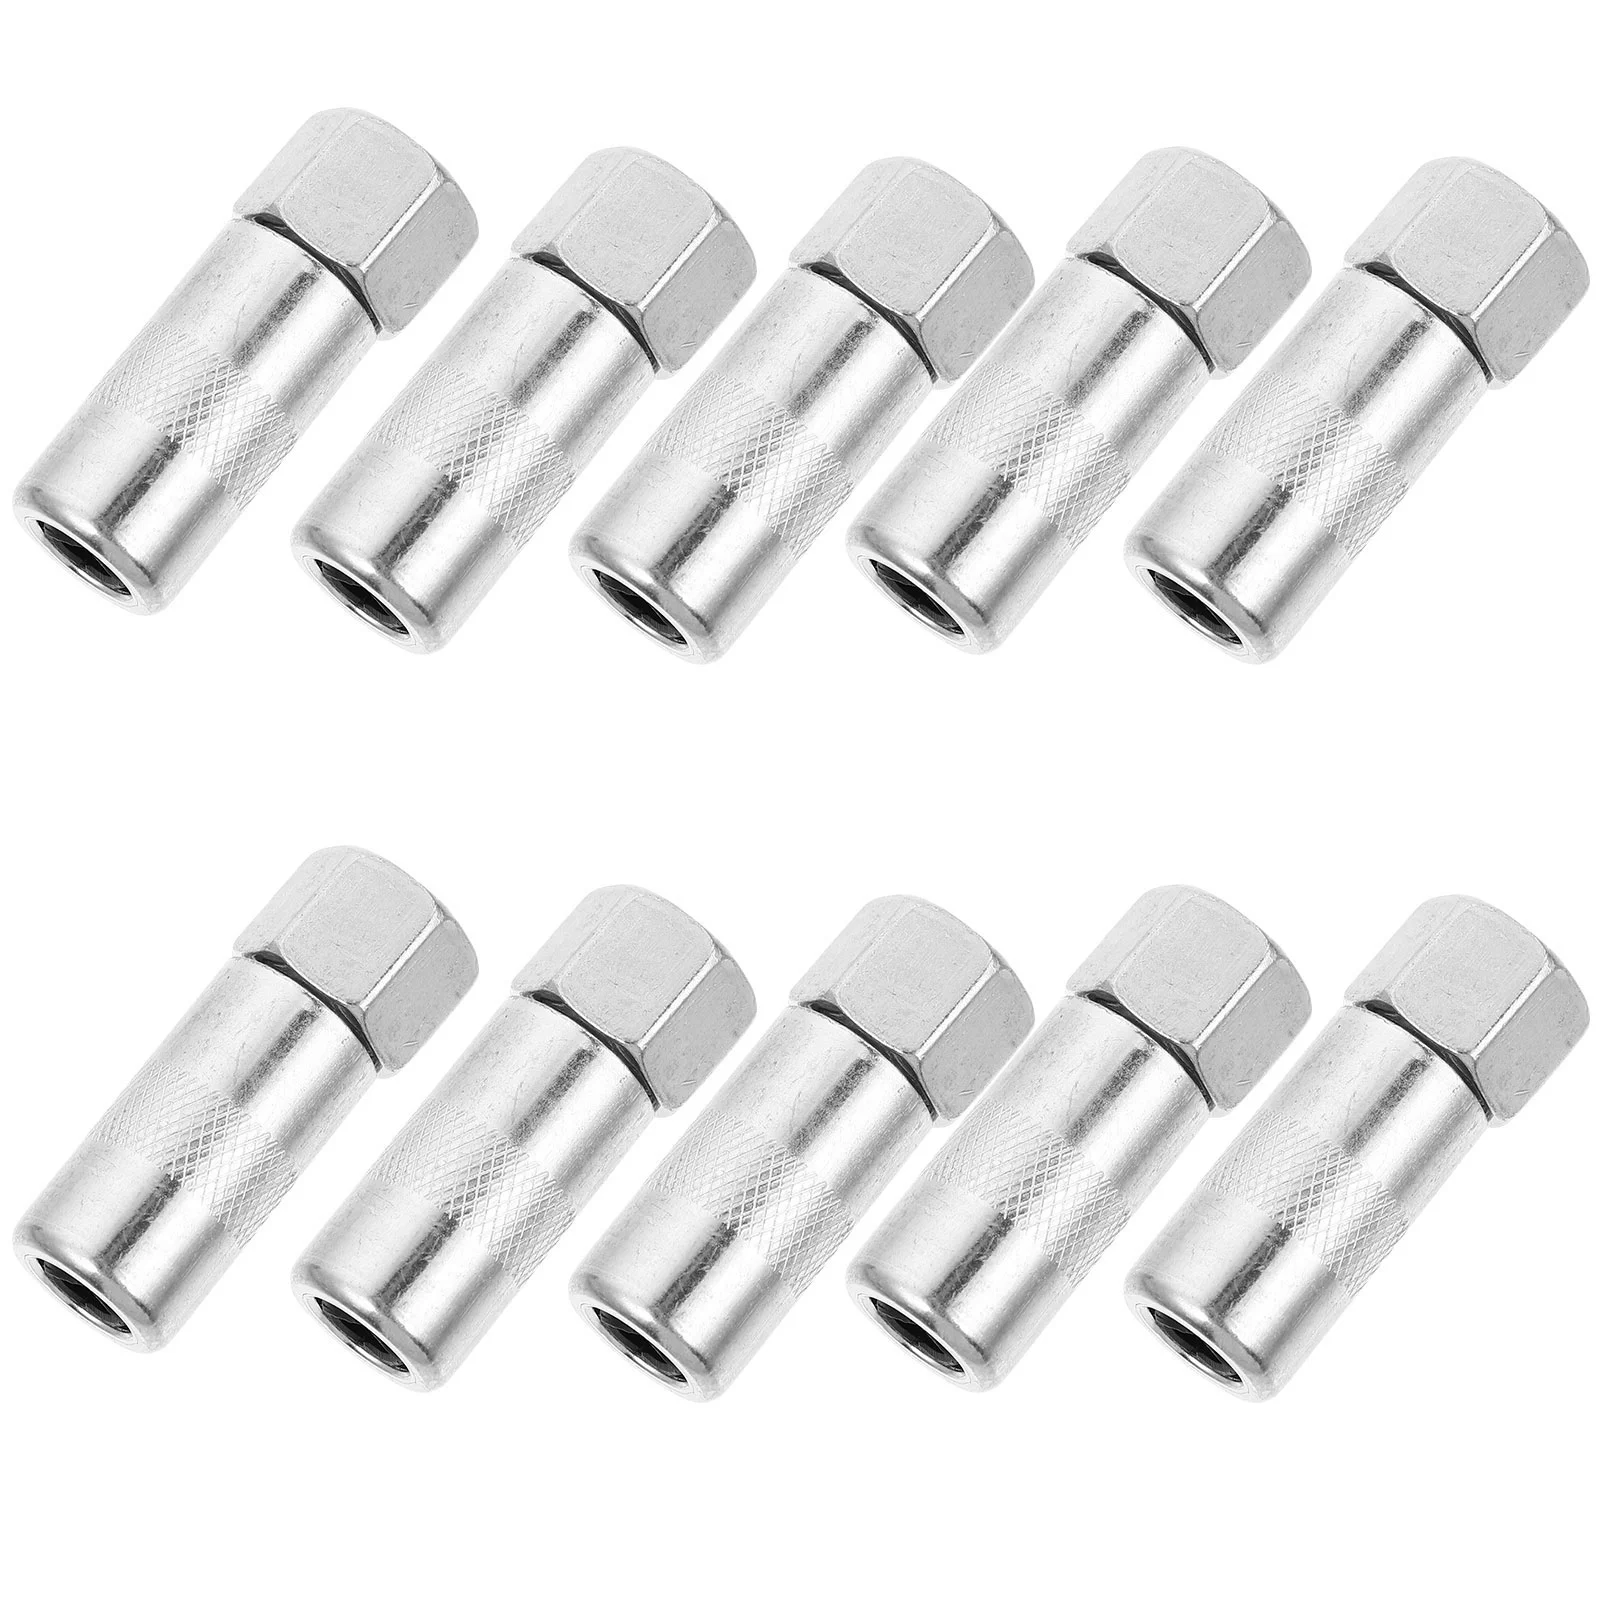 

10 Pcs Grease Tip Auto Parts Kit Accessories Nozzle Steel 4 Jaw Sprayer Injector